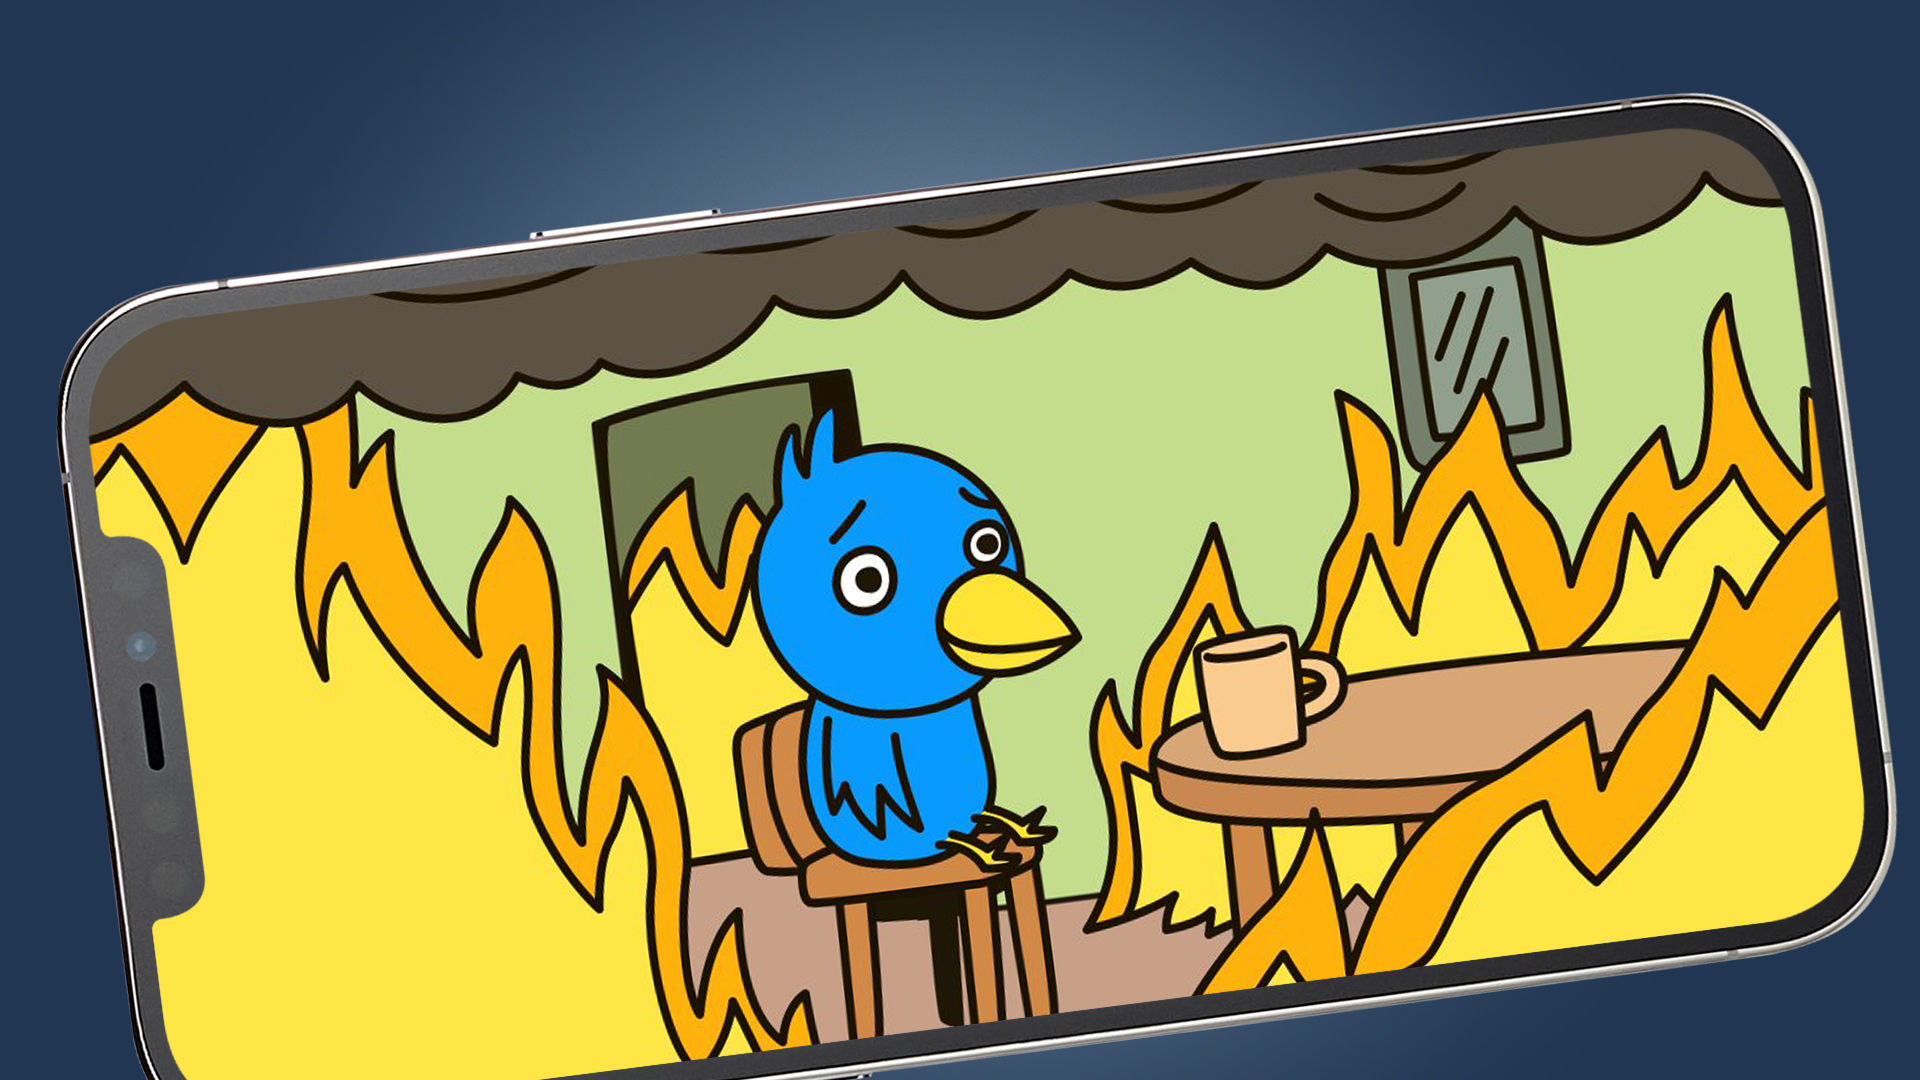 A phone screen showing a Twitter cartoon made by Twitterific of a bird sitting in a house surrounded by flames